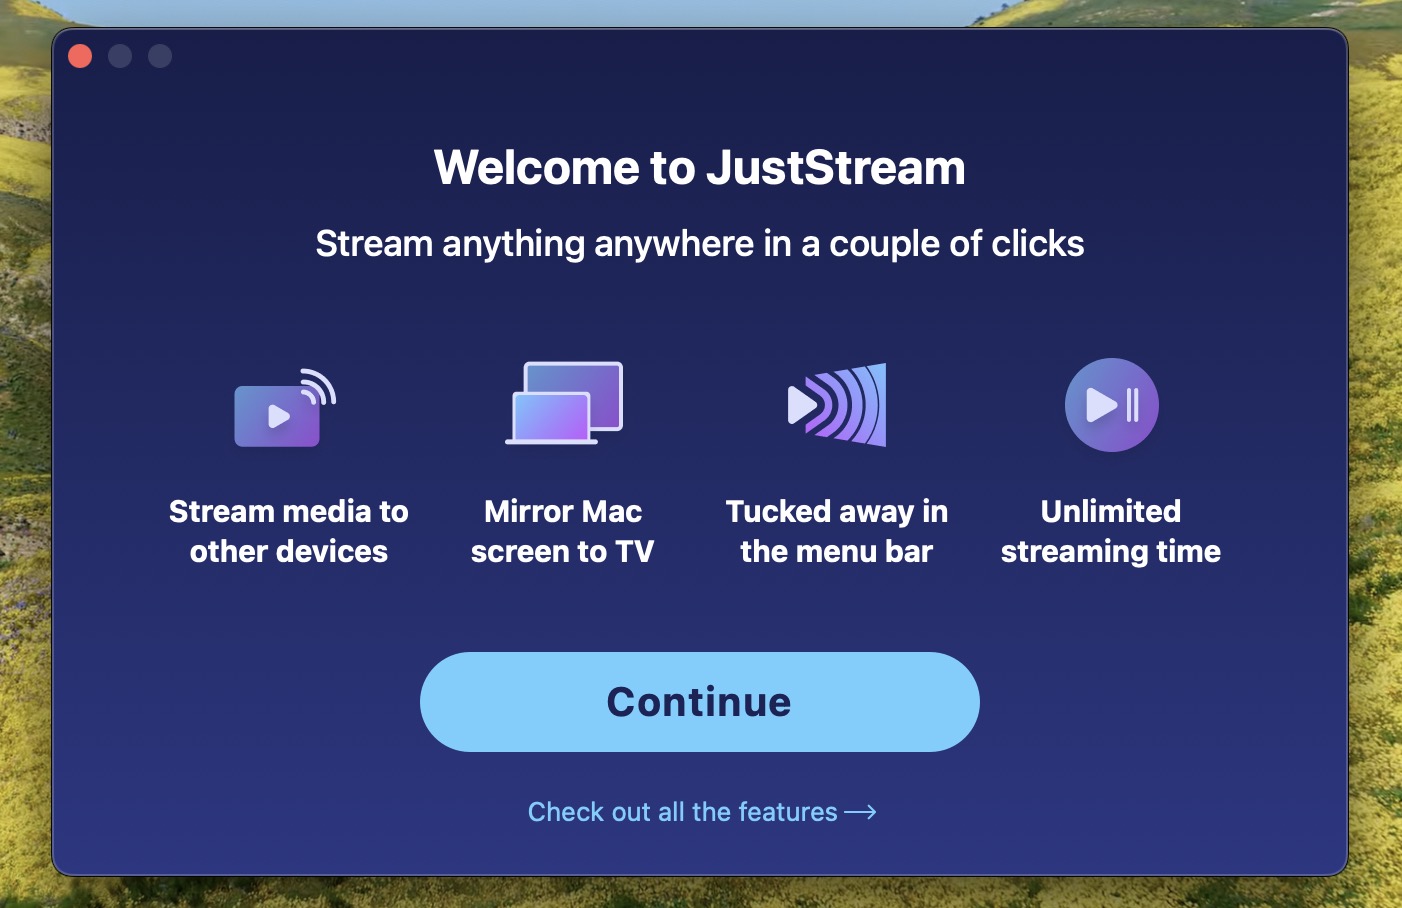 Install JustStream on your Mac